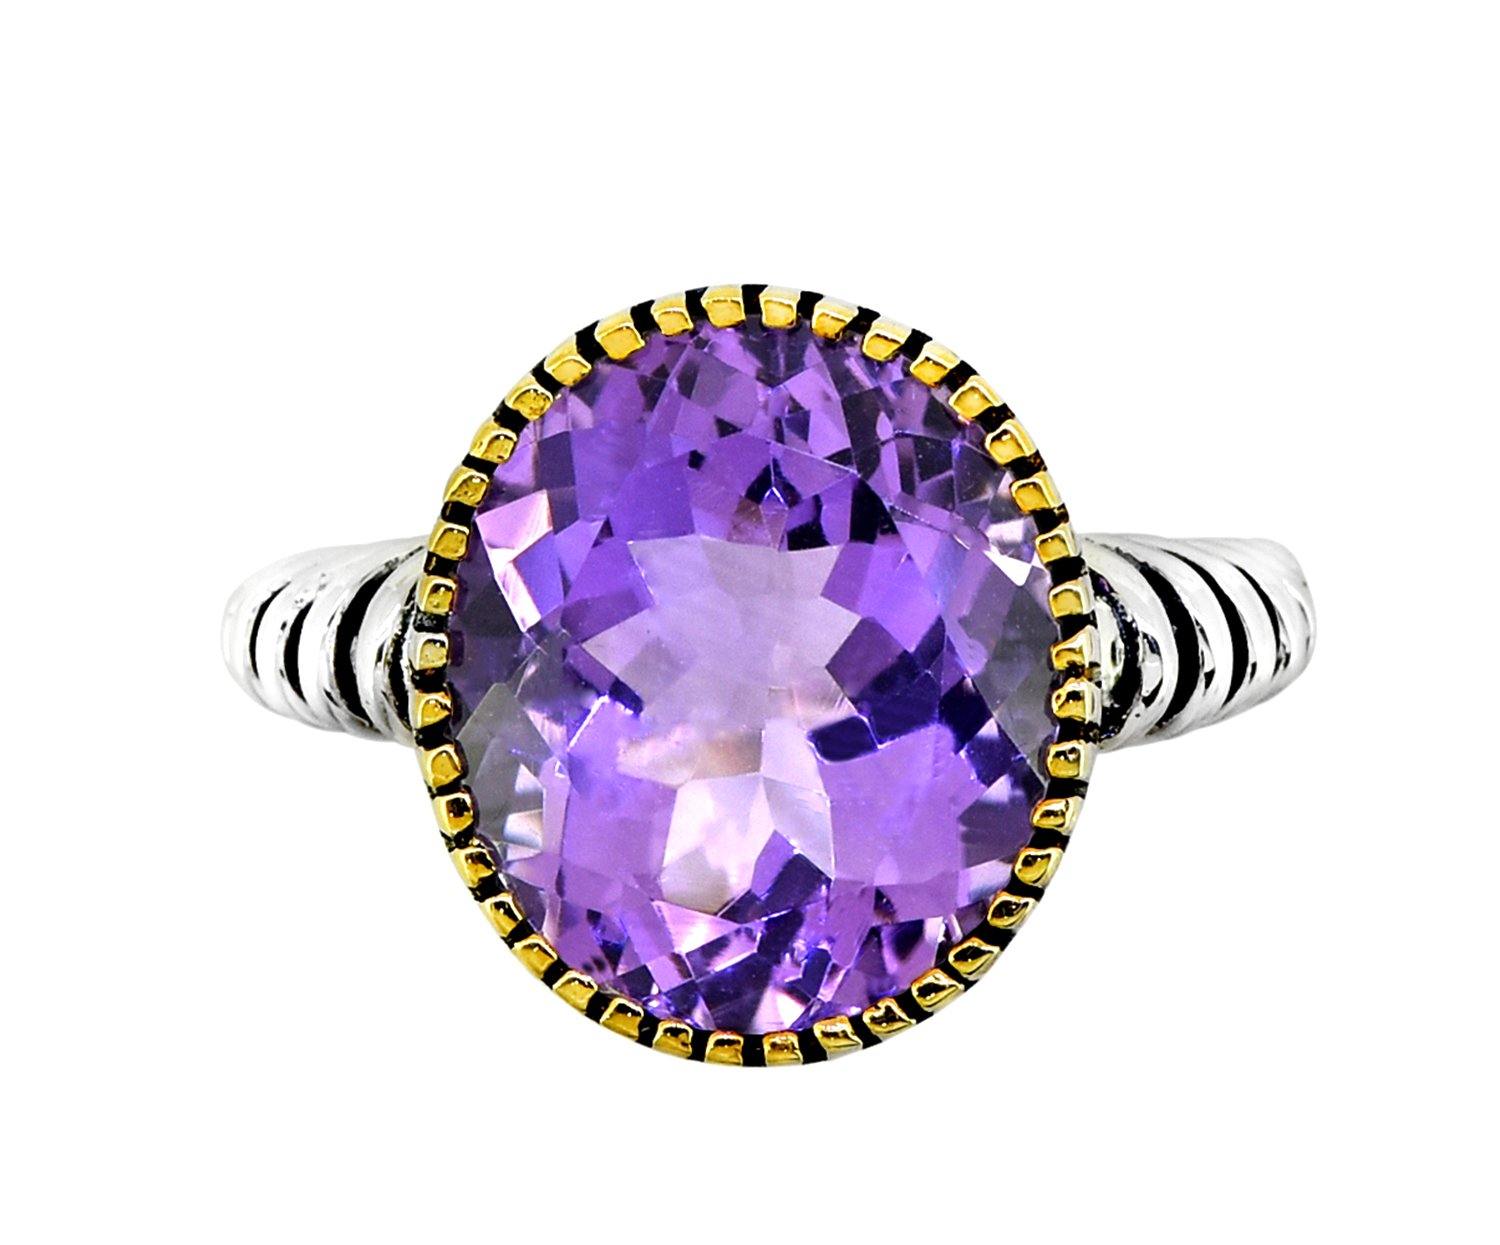 Pink Amethyst Solid 925 Sterling Silver Gold Plated Ring Genuine Gemstone Jewelry - YoTreasure